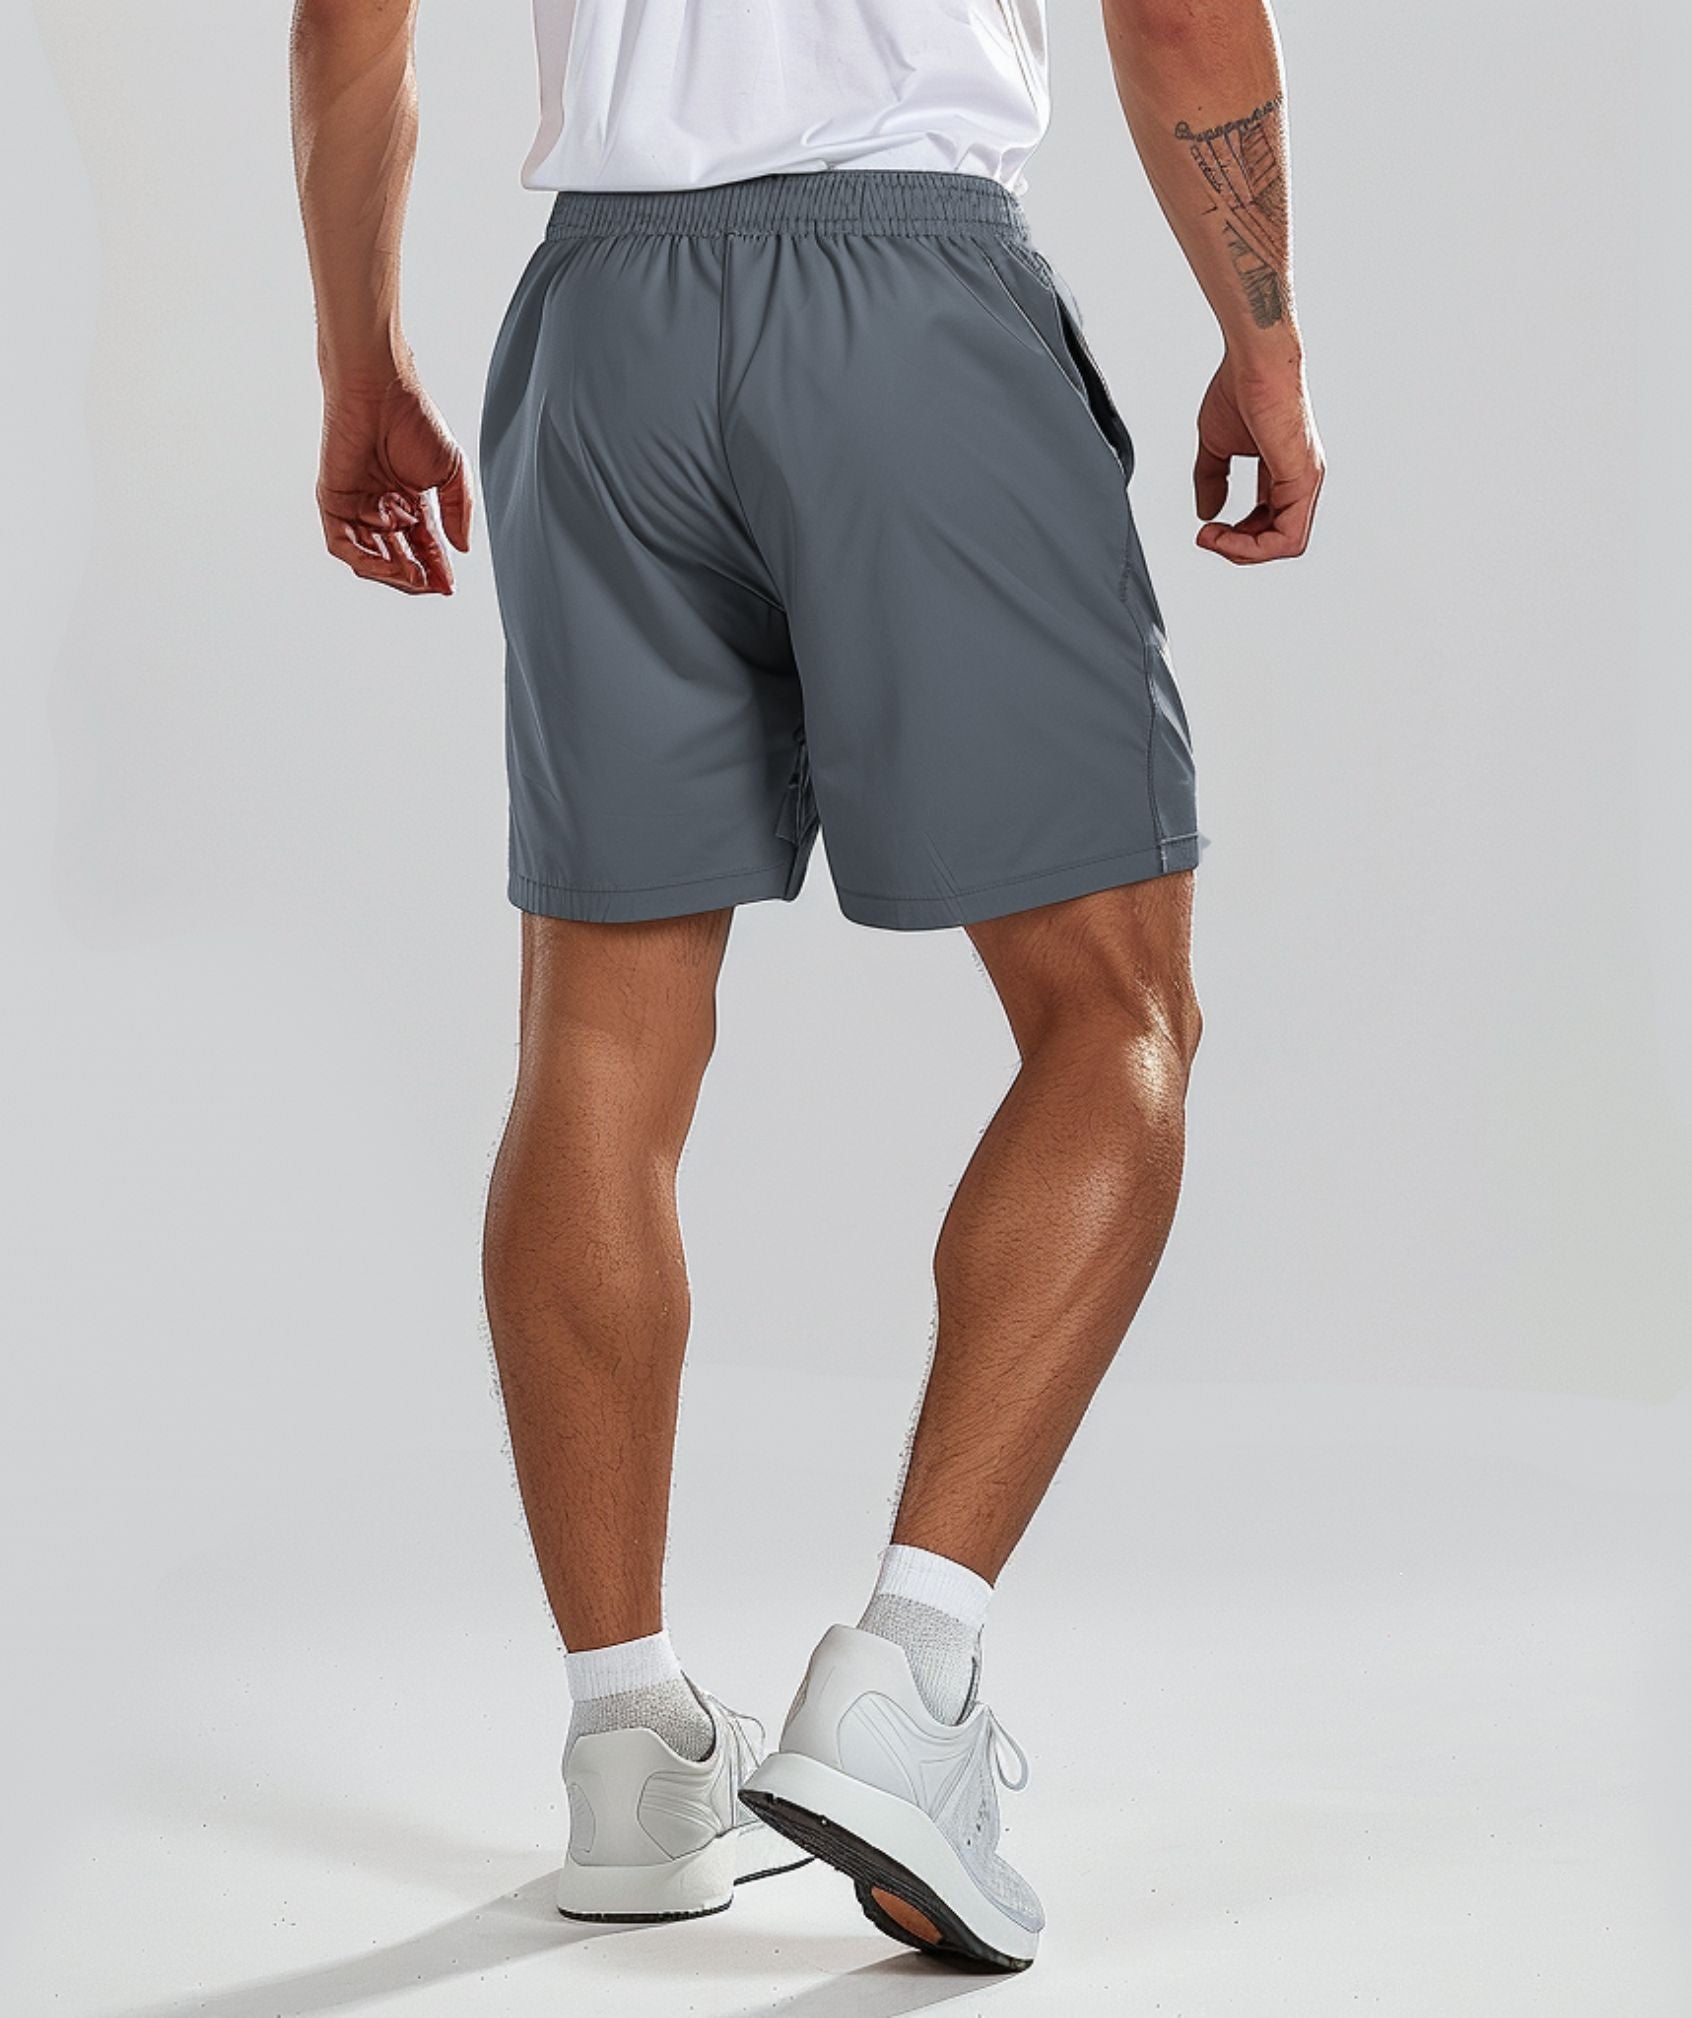 Apex™ gray Pinnacle Shorts back view - sustainable activewear